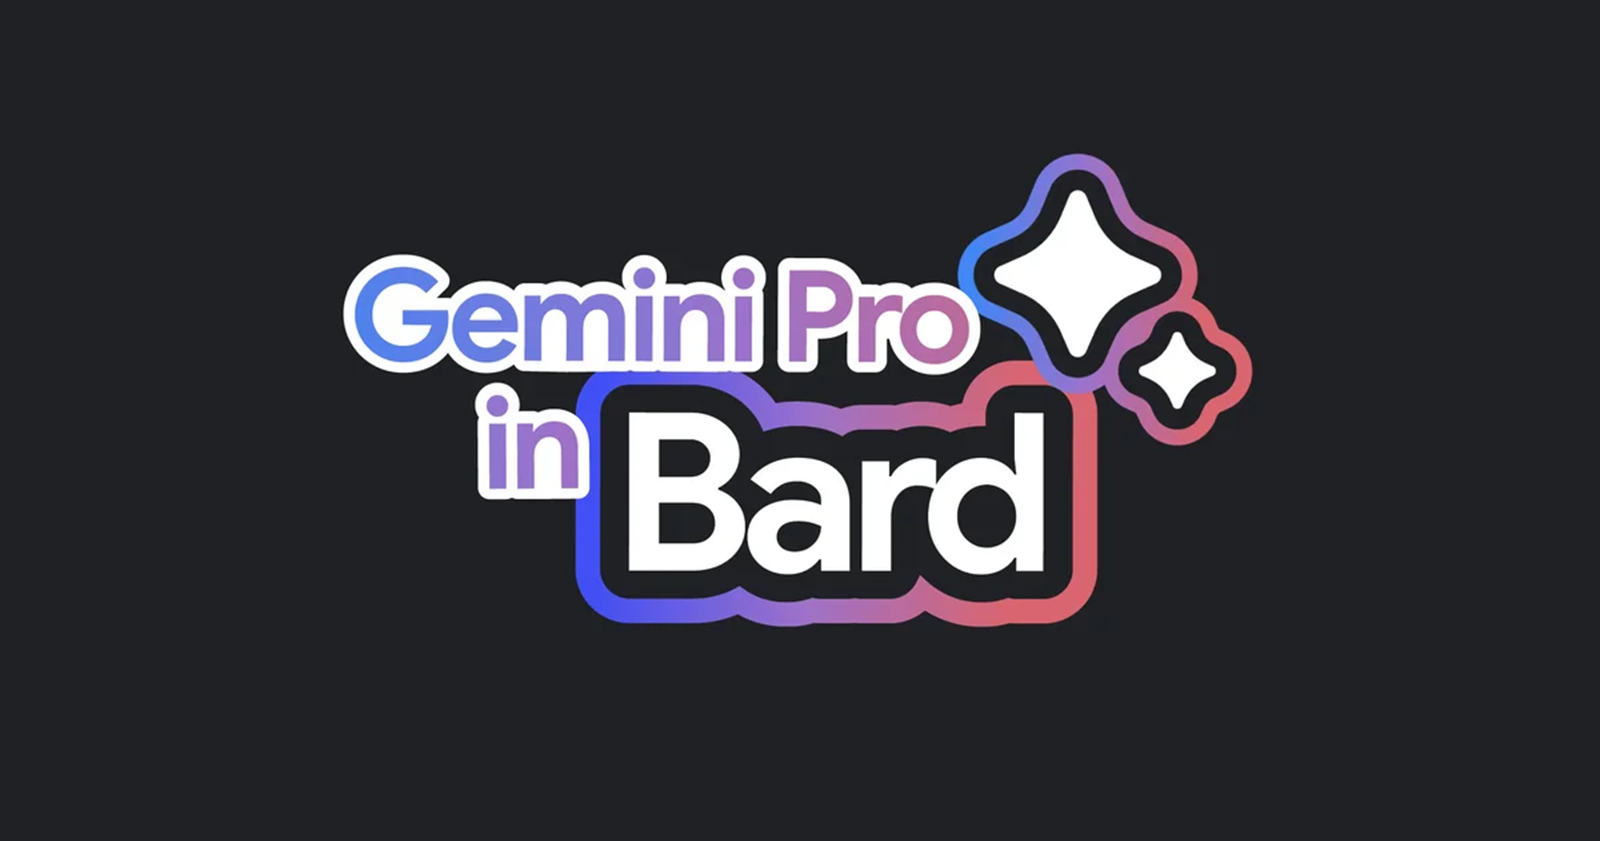 Google expands Bard's reach and creativity with Gemini Pro and image generation